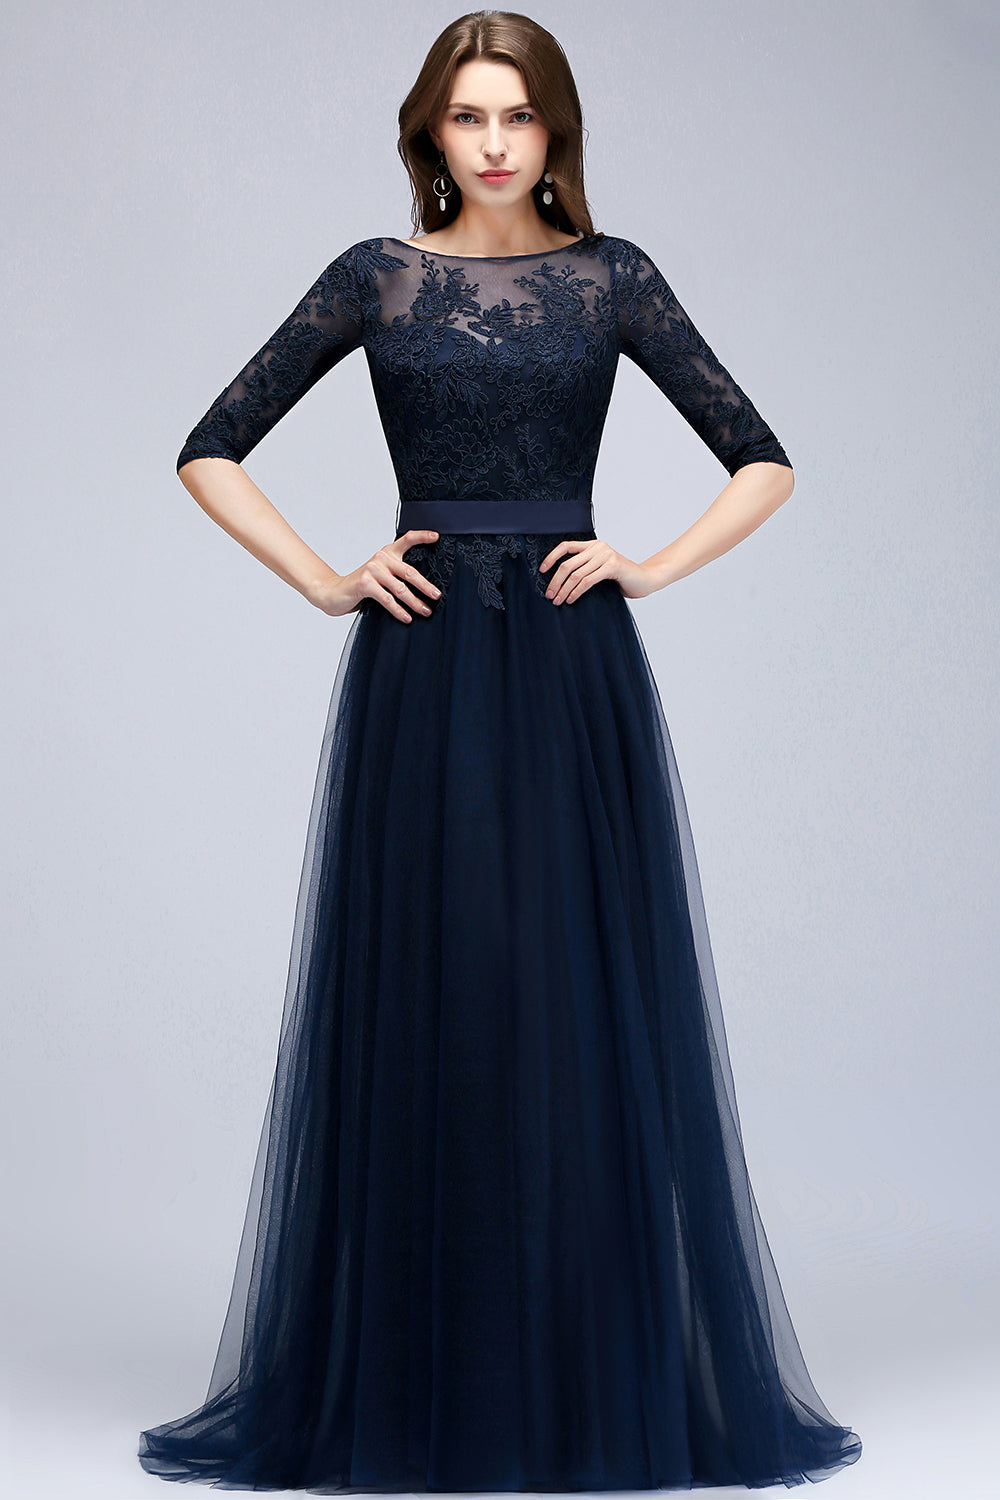 Elegant Half-Sleeves Lace Navy Bridesmaid Dresses with Appliques-27dress